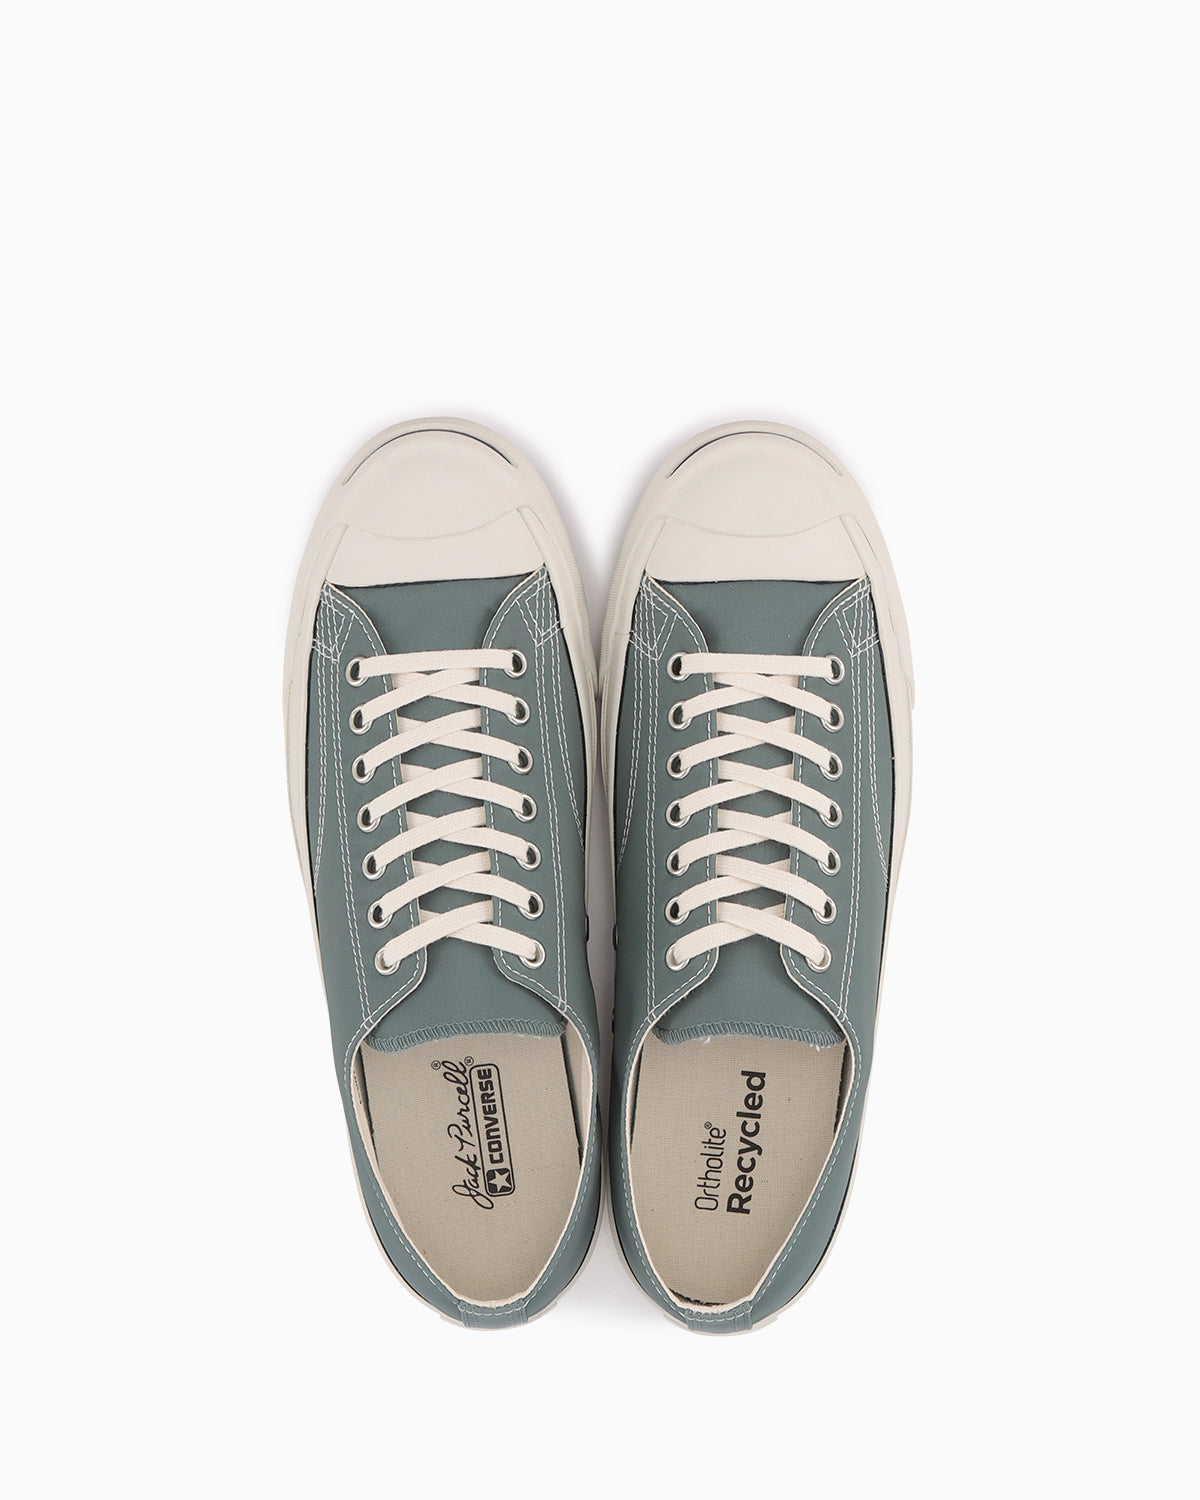 JACK PURCELL ECONYL